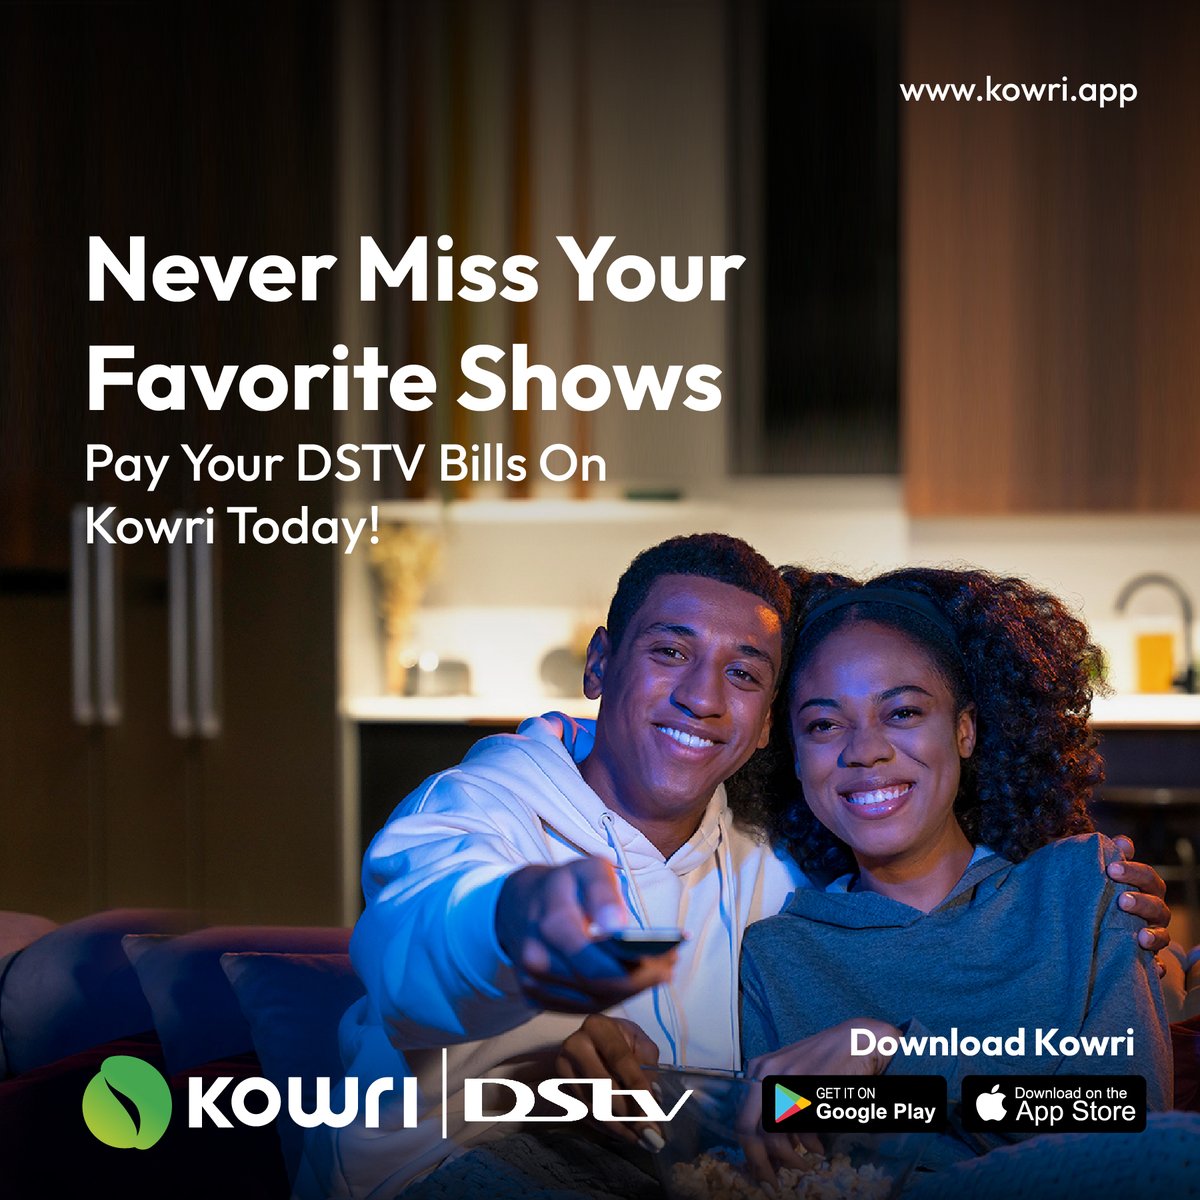 Catch up on your favorite shows stress-free this weekend! Bill payments, simplified. Switch to Kowri today #kowri #kowriismore